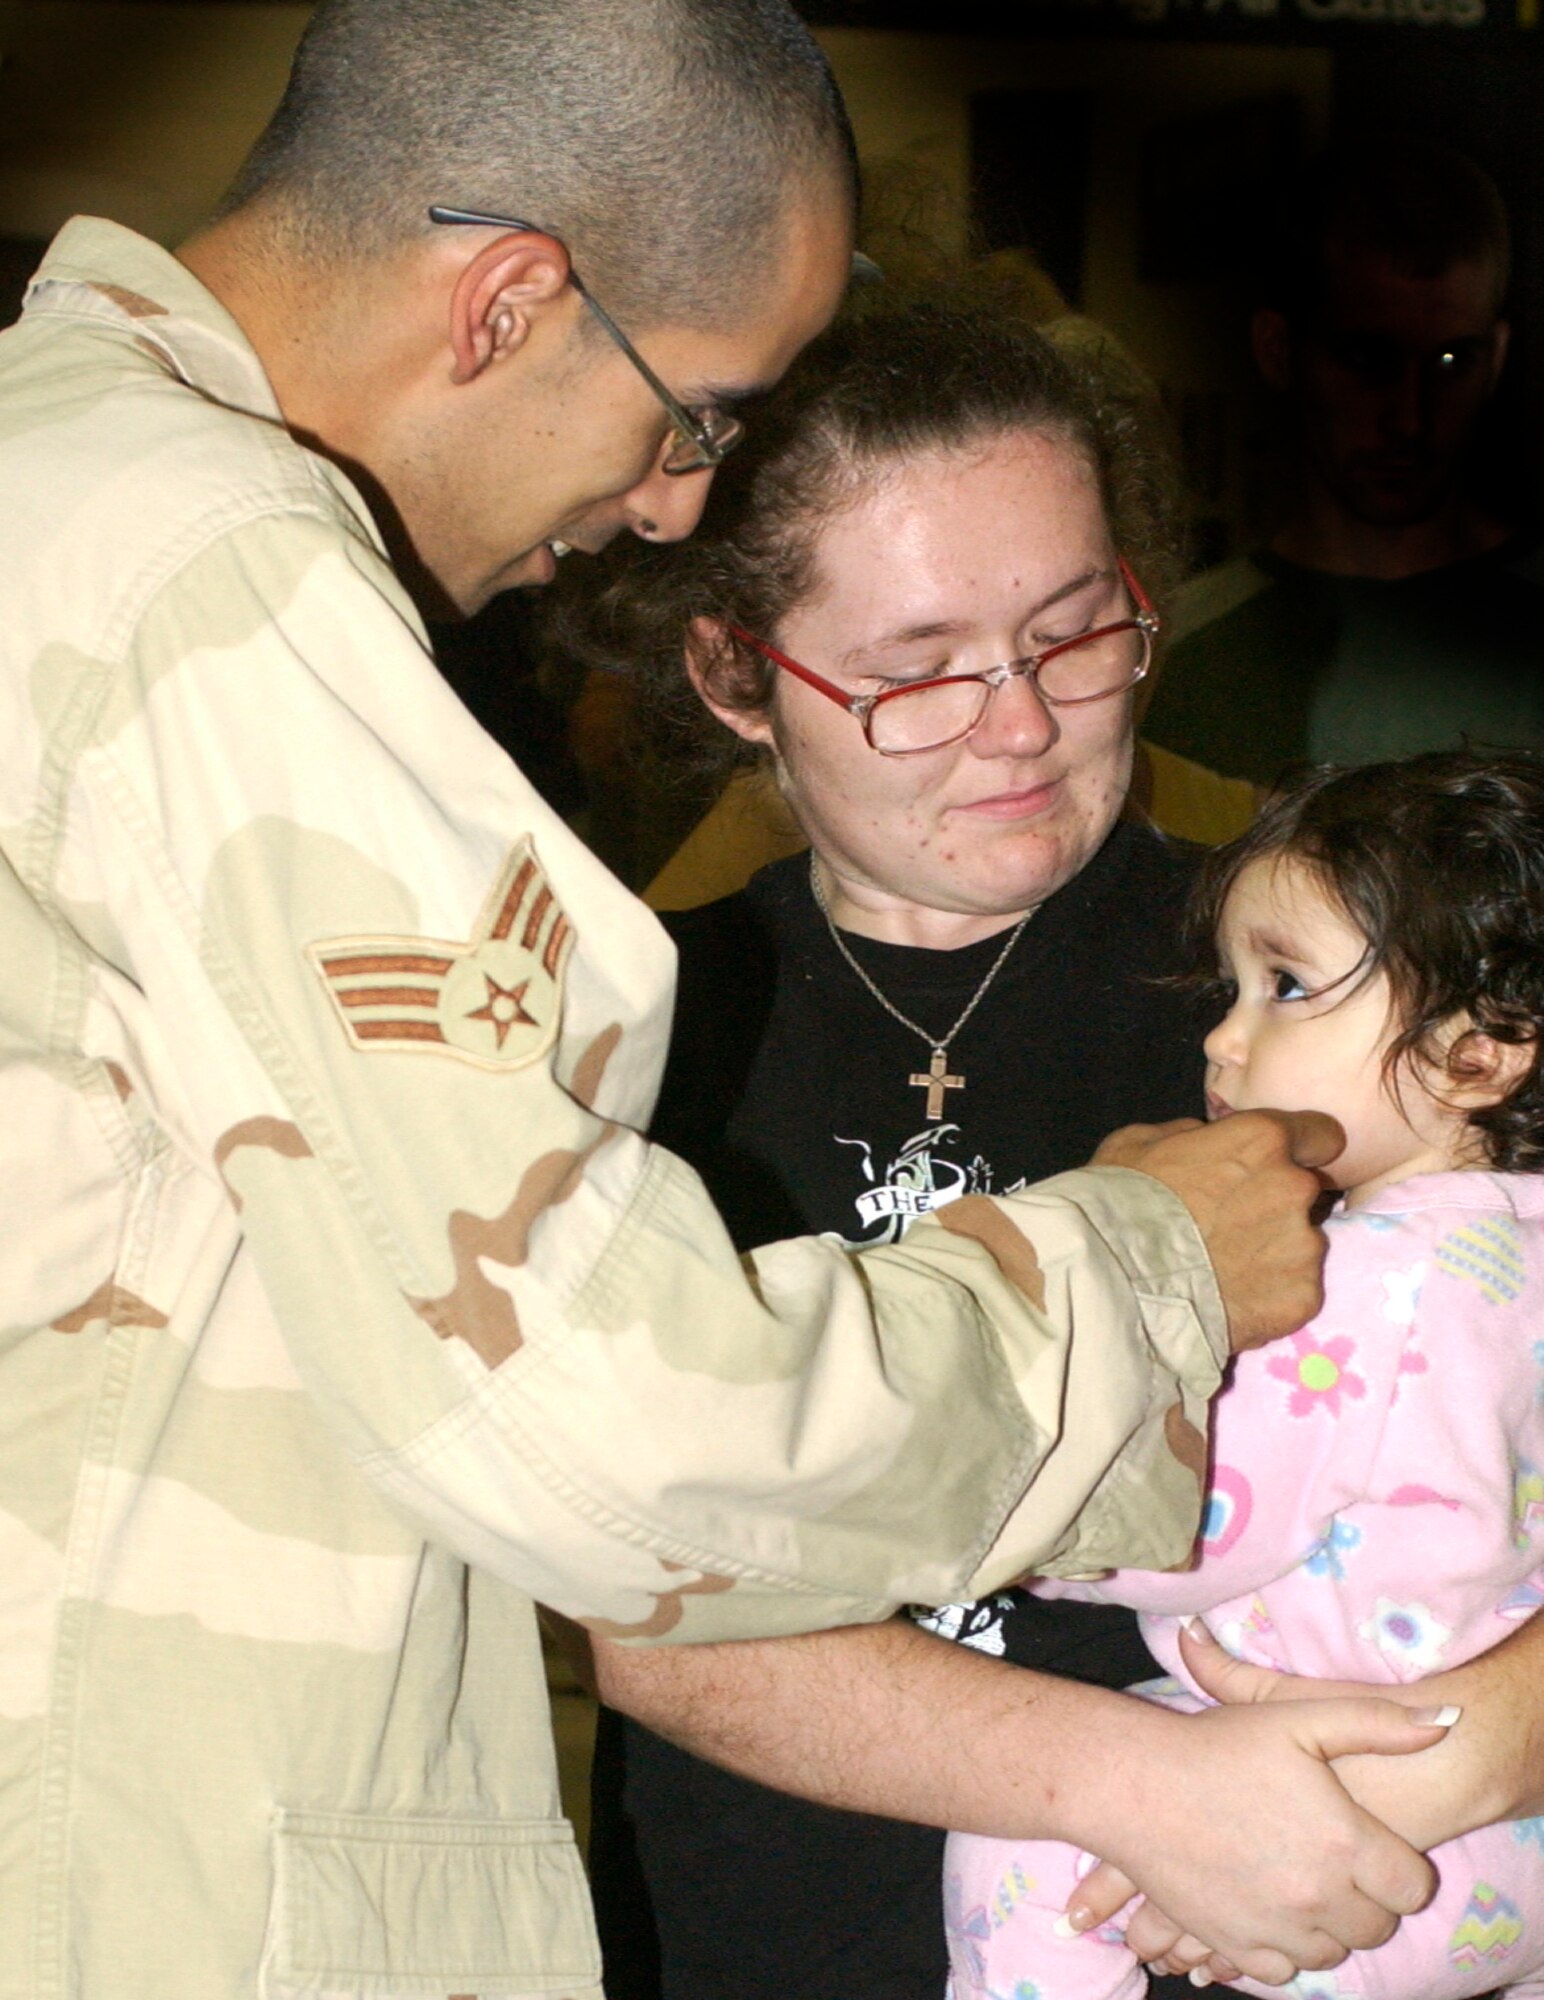 Senior Airmen Rudy Gonzales says hello to his 18-month-old daughter, Alexandria Gonzales, as her mother Crystal Chinn holds he. Airmen Gonzales was one of six team members from the 452nd Security Forces Squadron at March Air Reserve Base to return from a six month deployment to Kirkuk, Iraq on Sat., August 11, at the Los Angeles Airport.                               